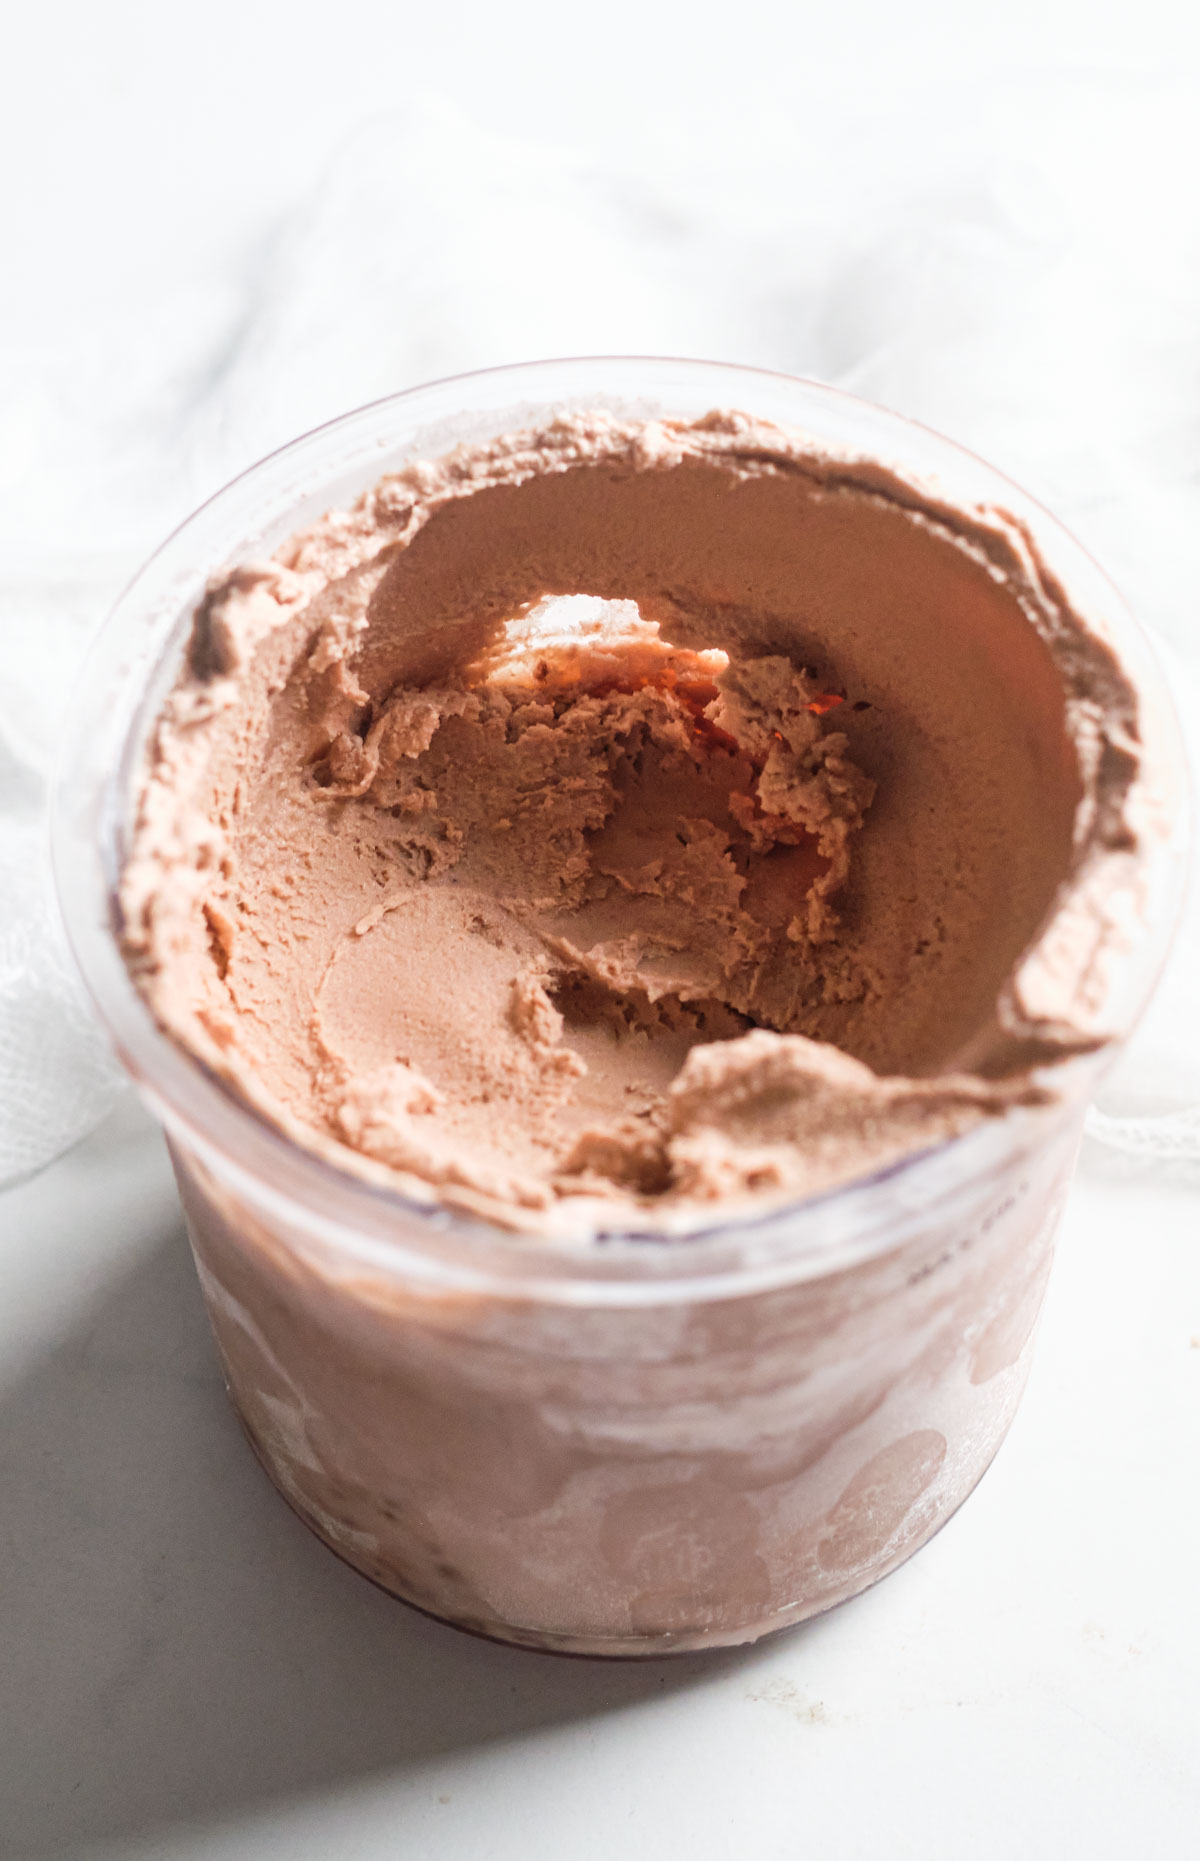 a glass container filled with chocolate ice cream ready to be served.